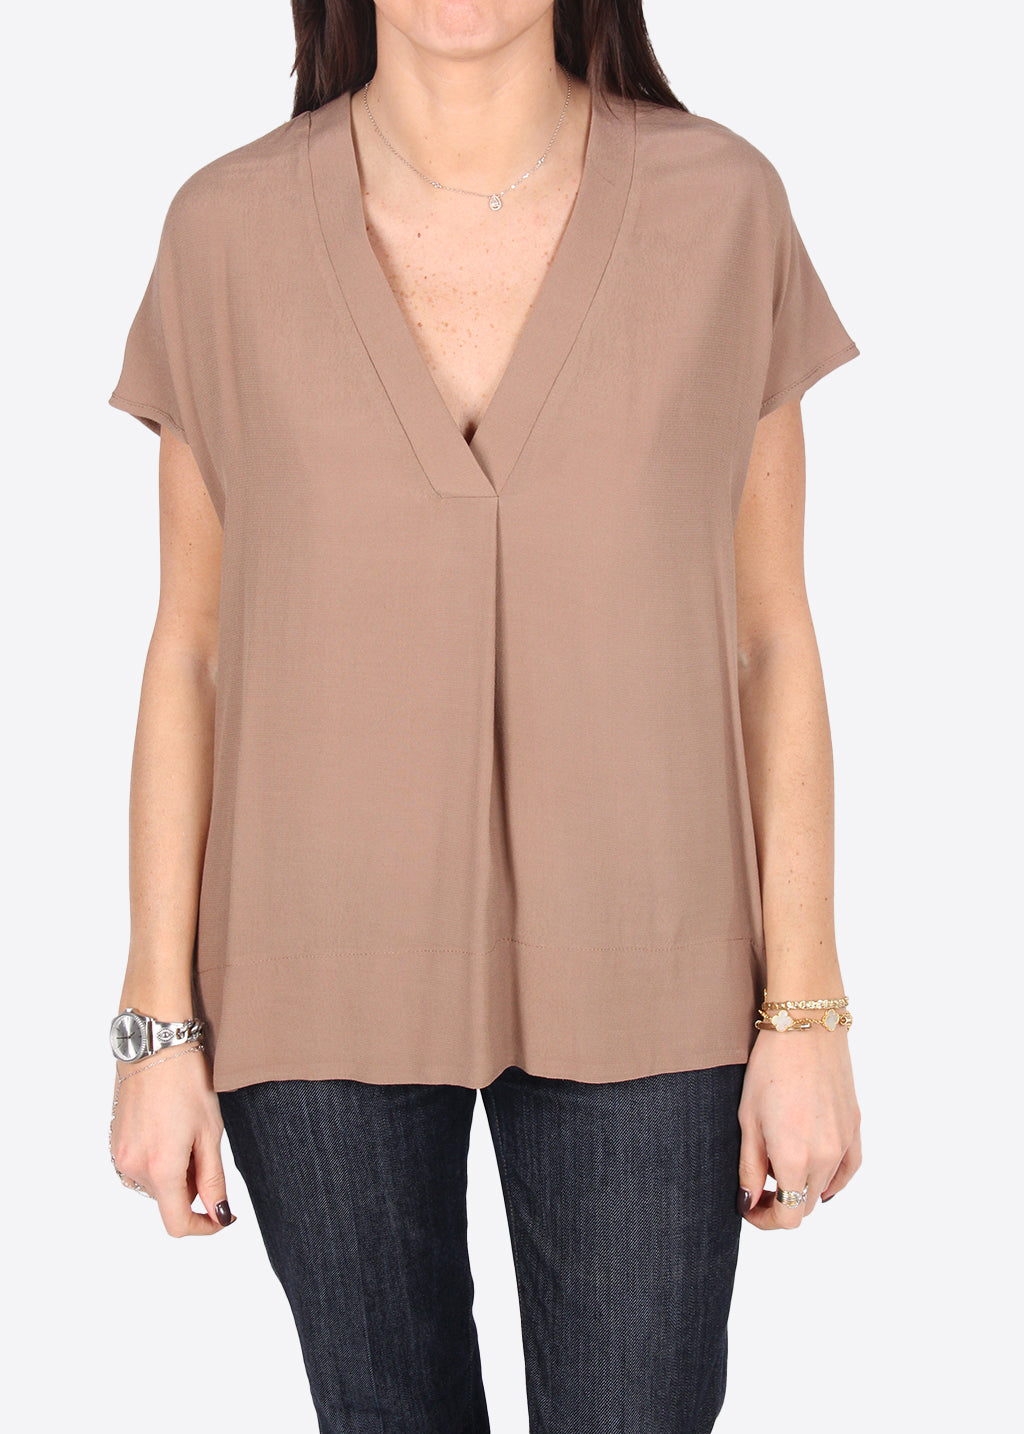 Top with front V neckline